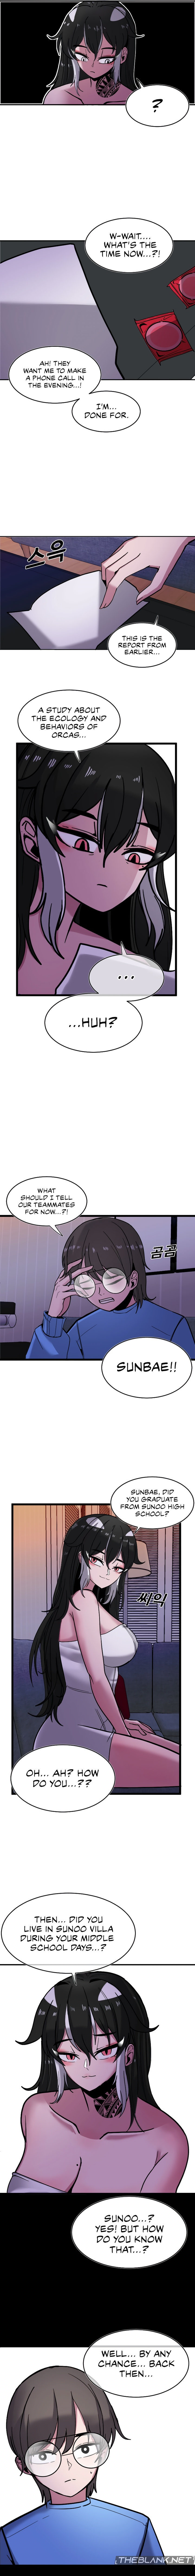 Double Life of Gukbap - Chapter 2 Page 7